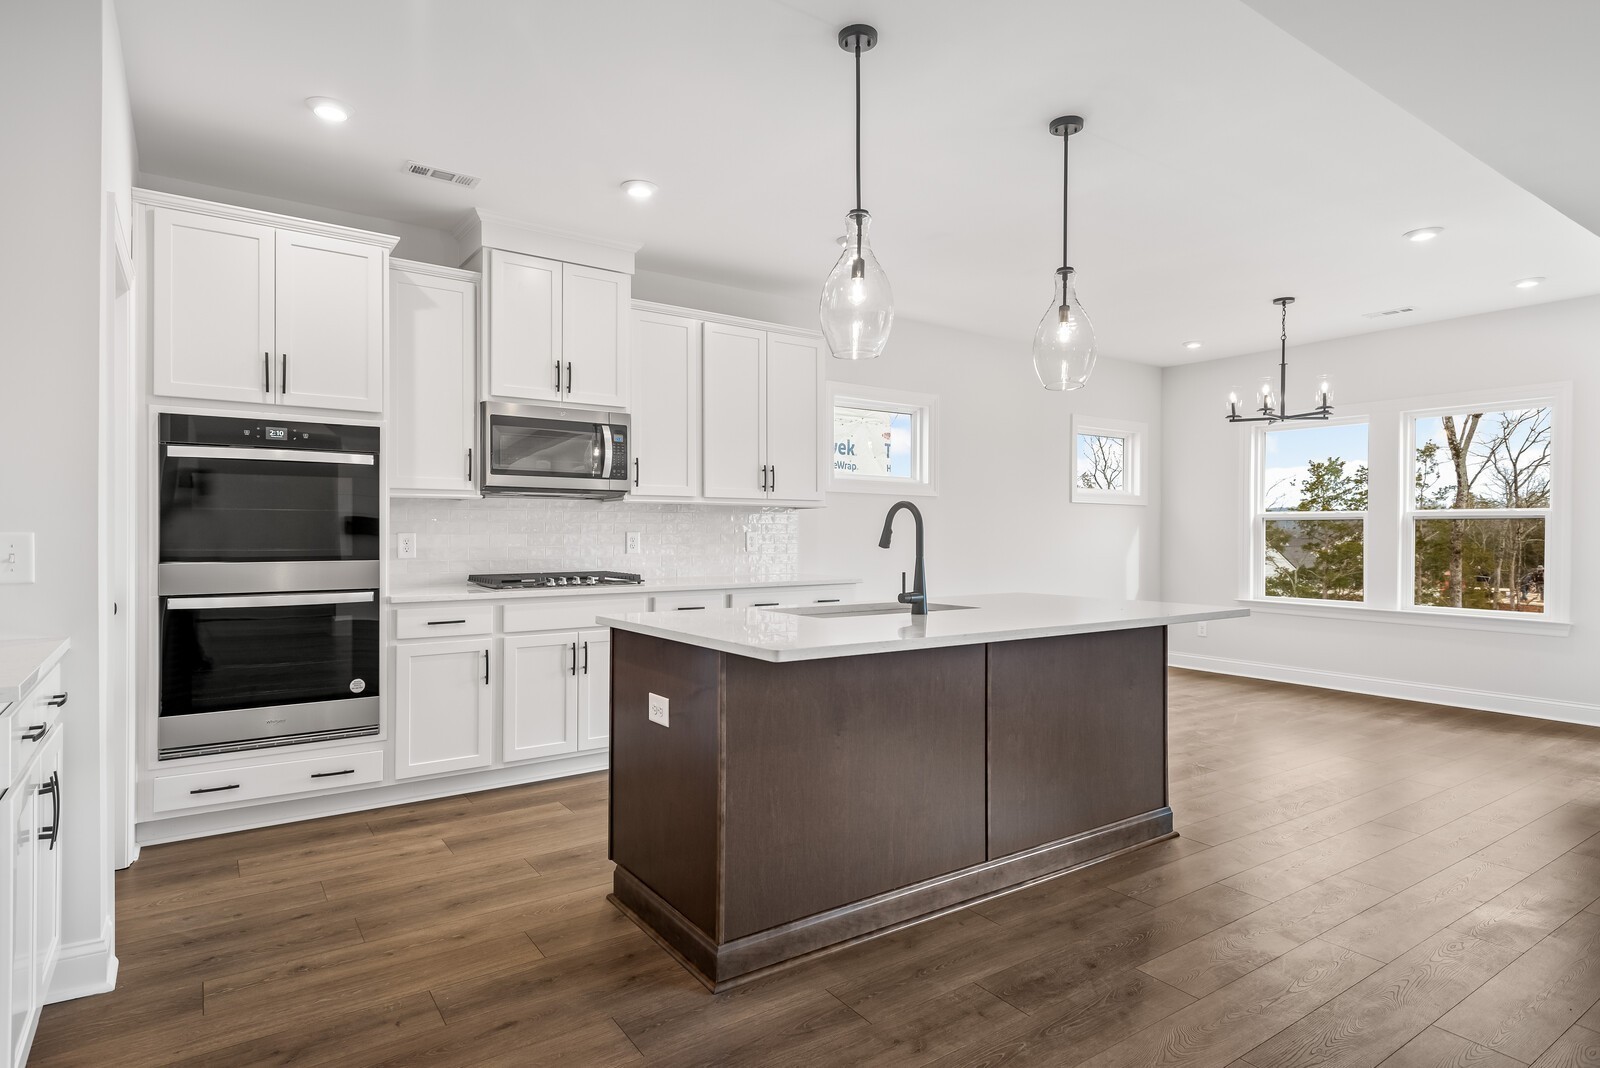 a kitchen with stainless steel appliances kitchen island a sink a stove and a wooden floor